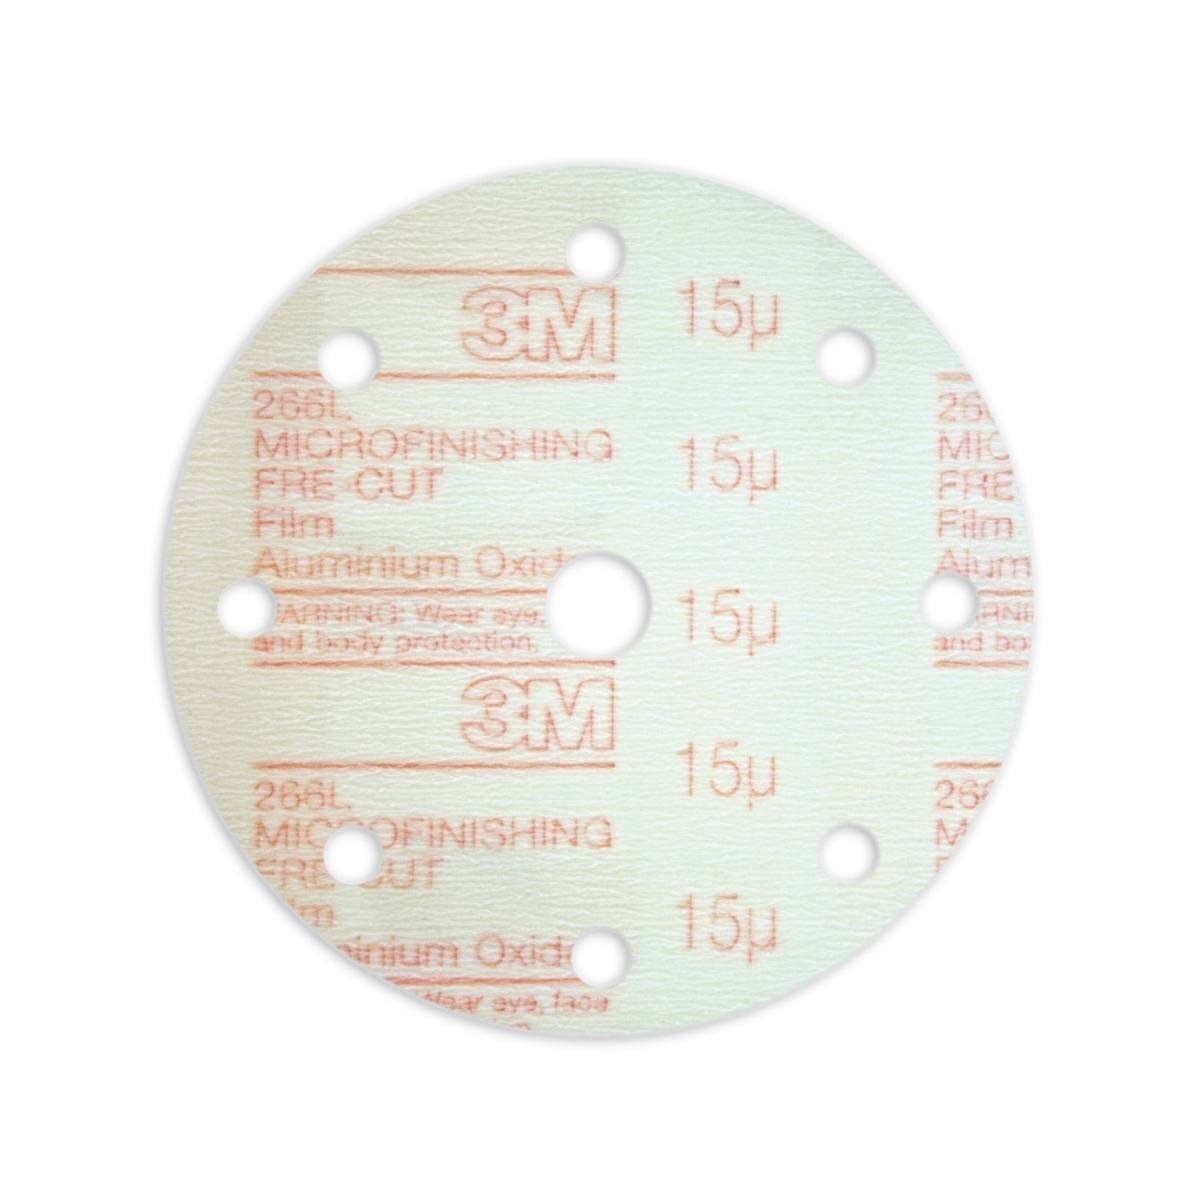 3M Hookit Velcro-backed microfinishing film disc 266L, 125mm, 15 microns, non-perforated